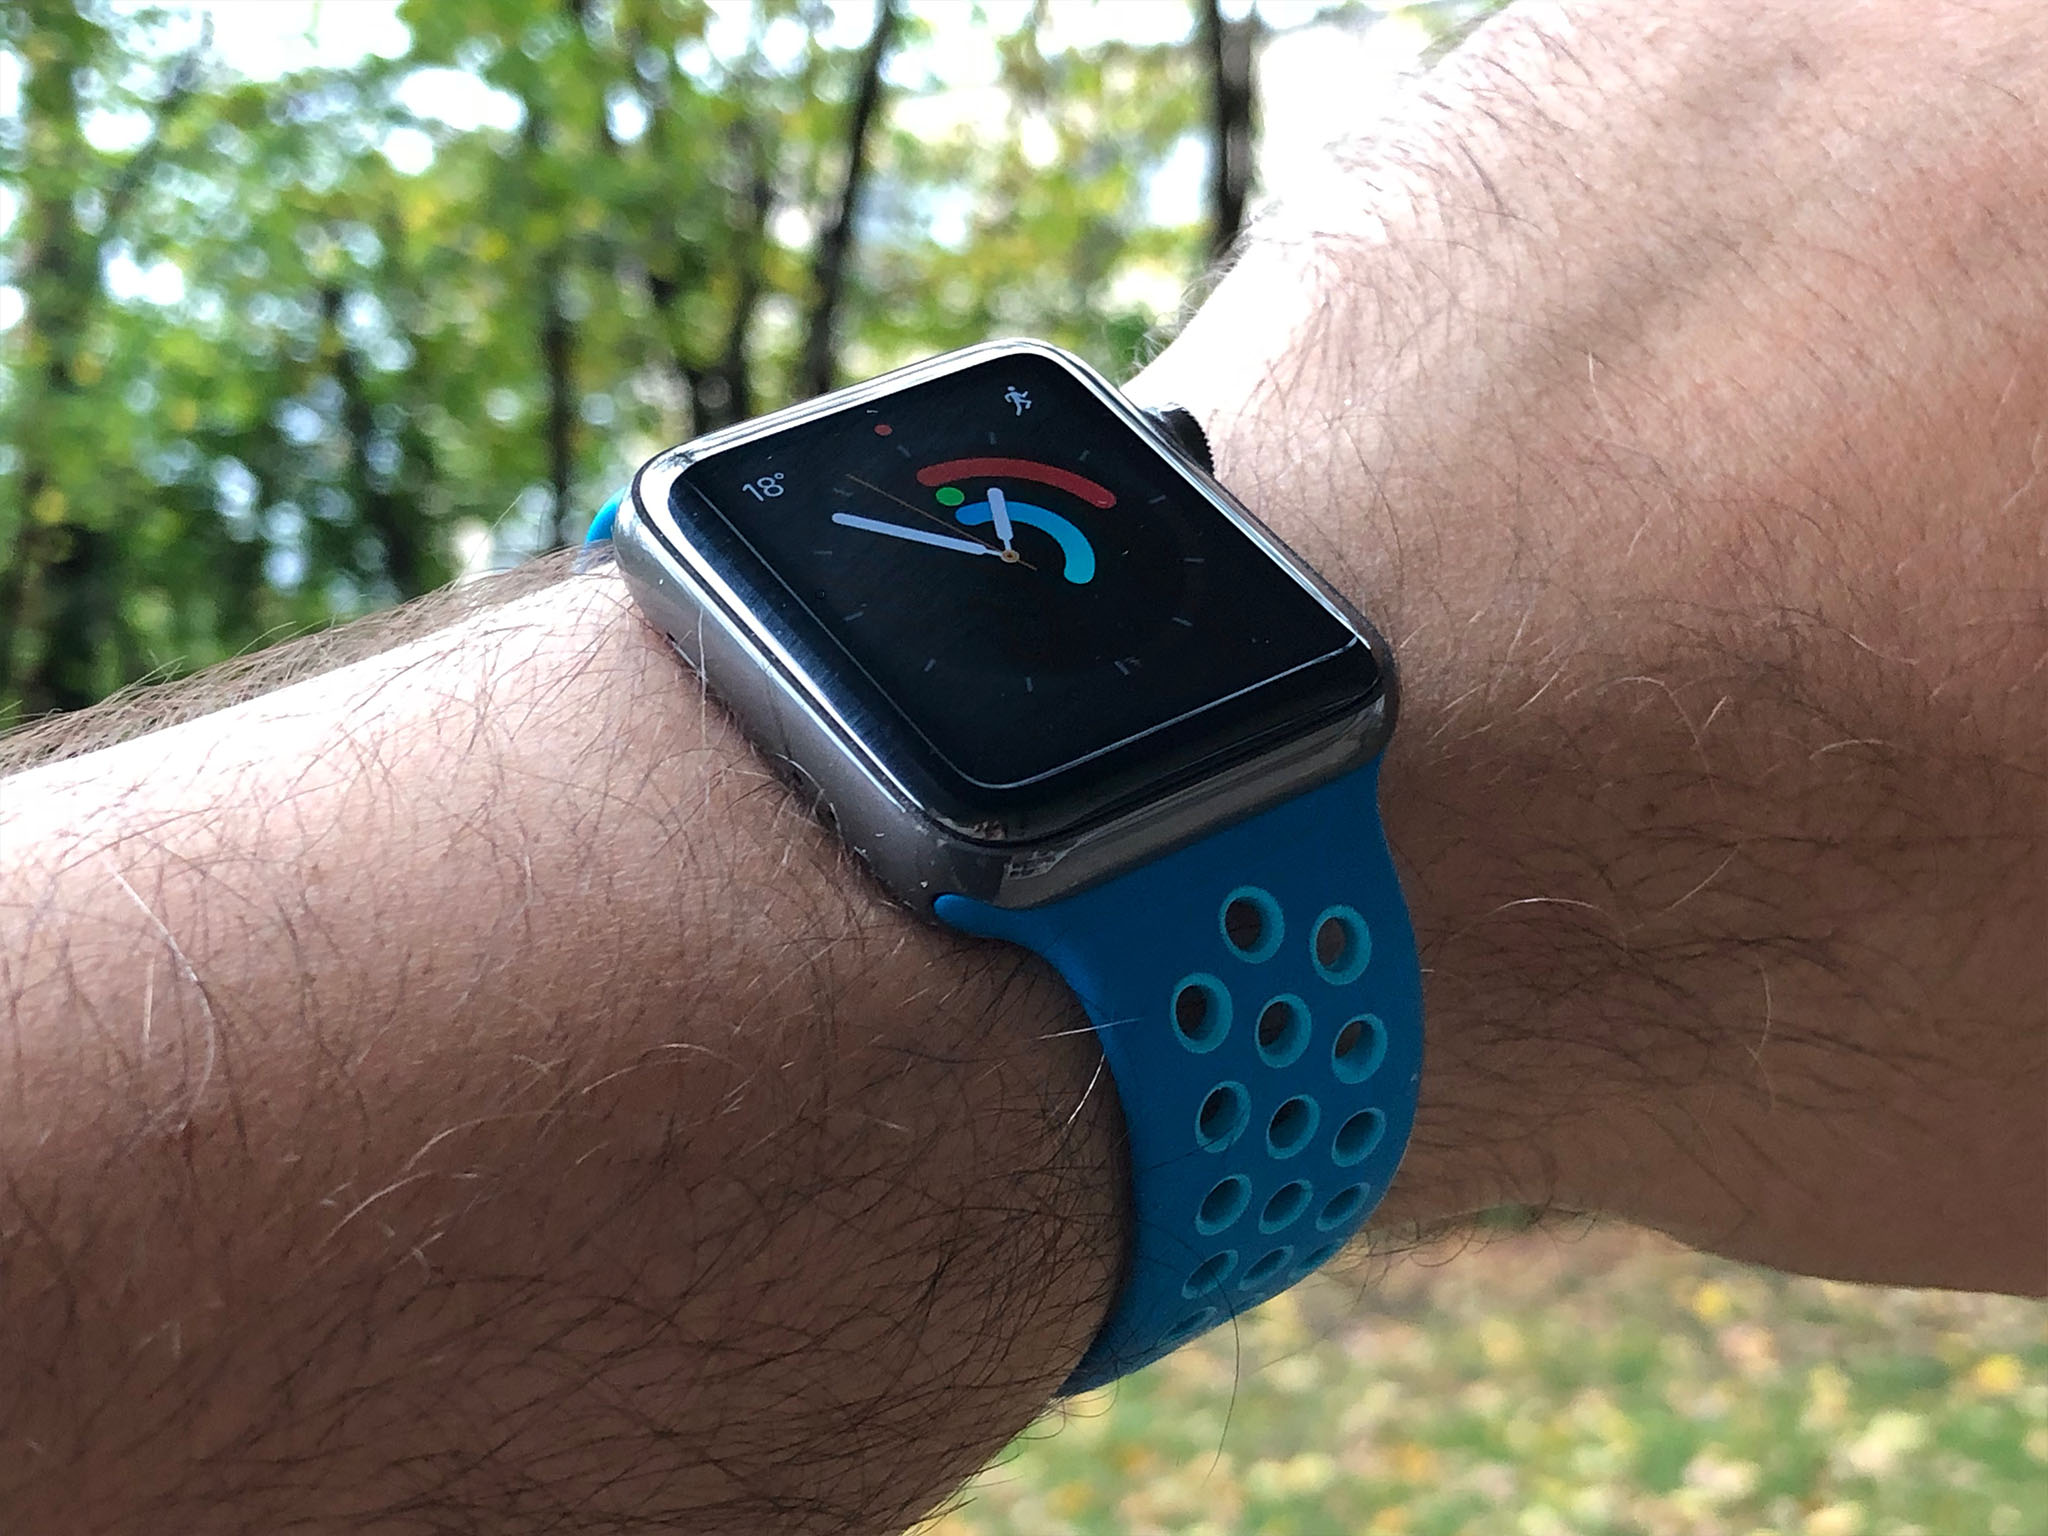 iwatch 3 space grey